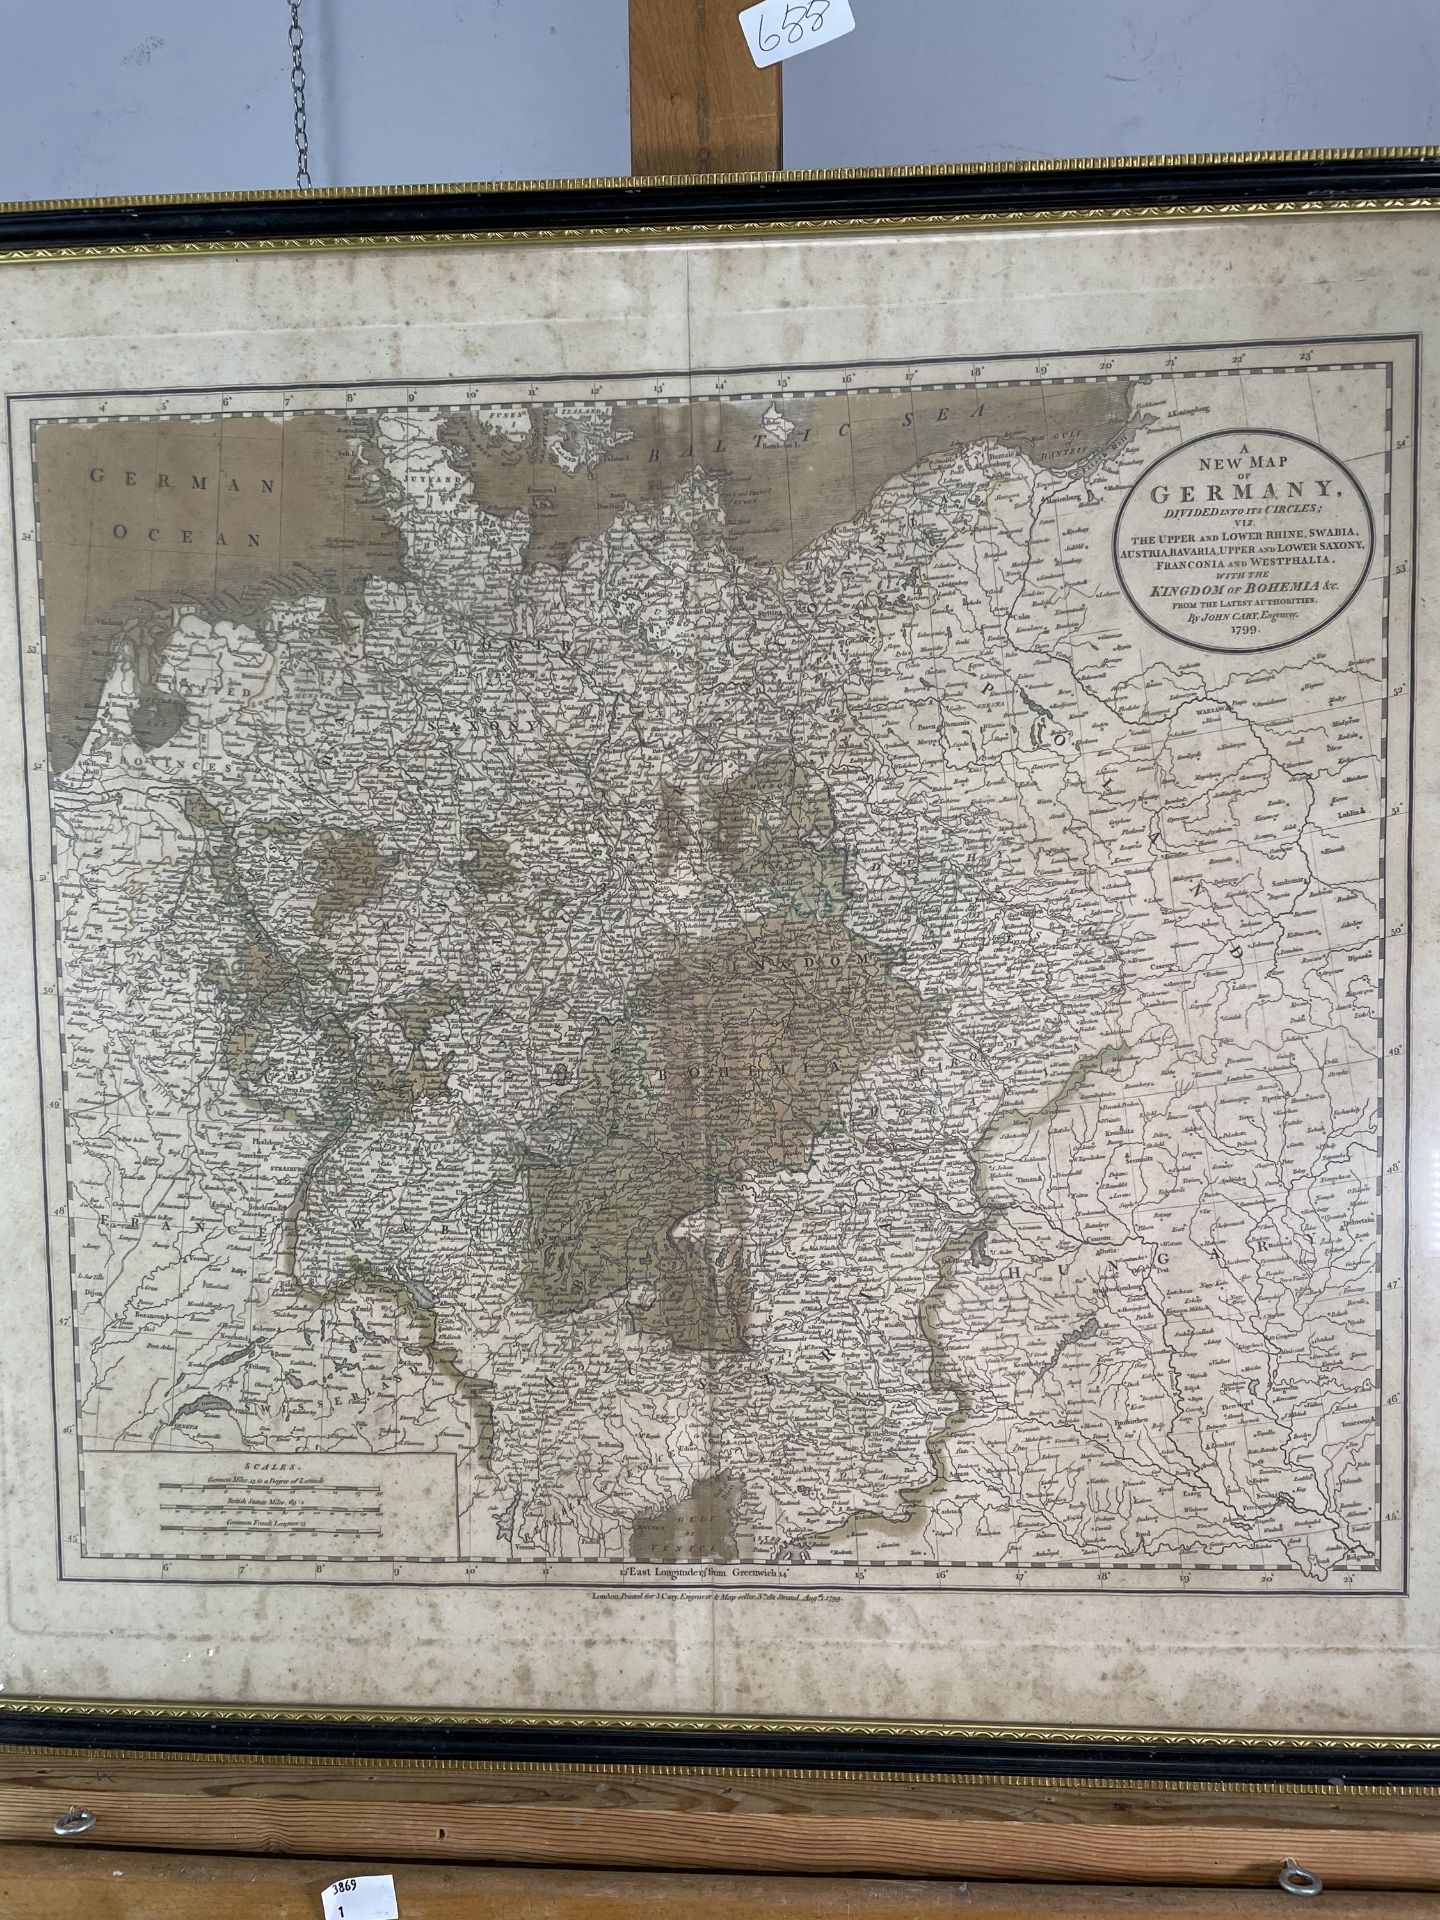 after HESSEL GERARDO. 'Typus Hispaniae.' Spain and Porugal, engraved map, glazed and framed, 1631, - Image 4 of 4